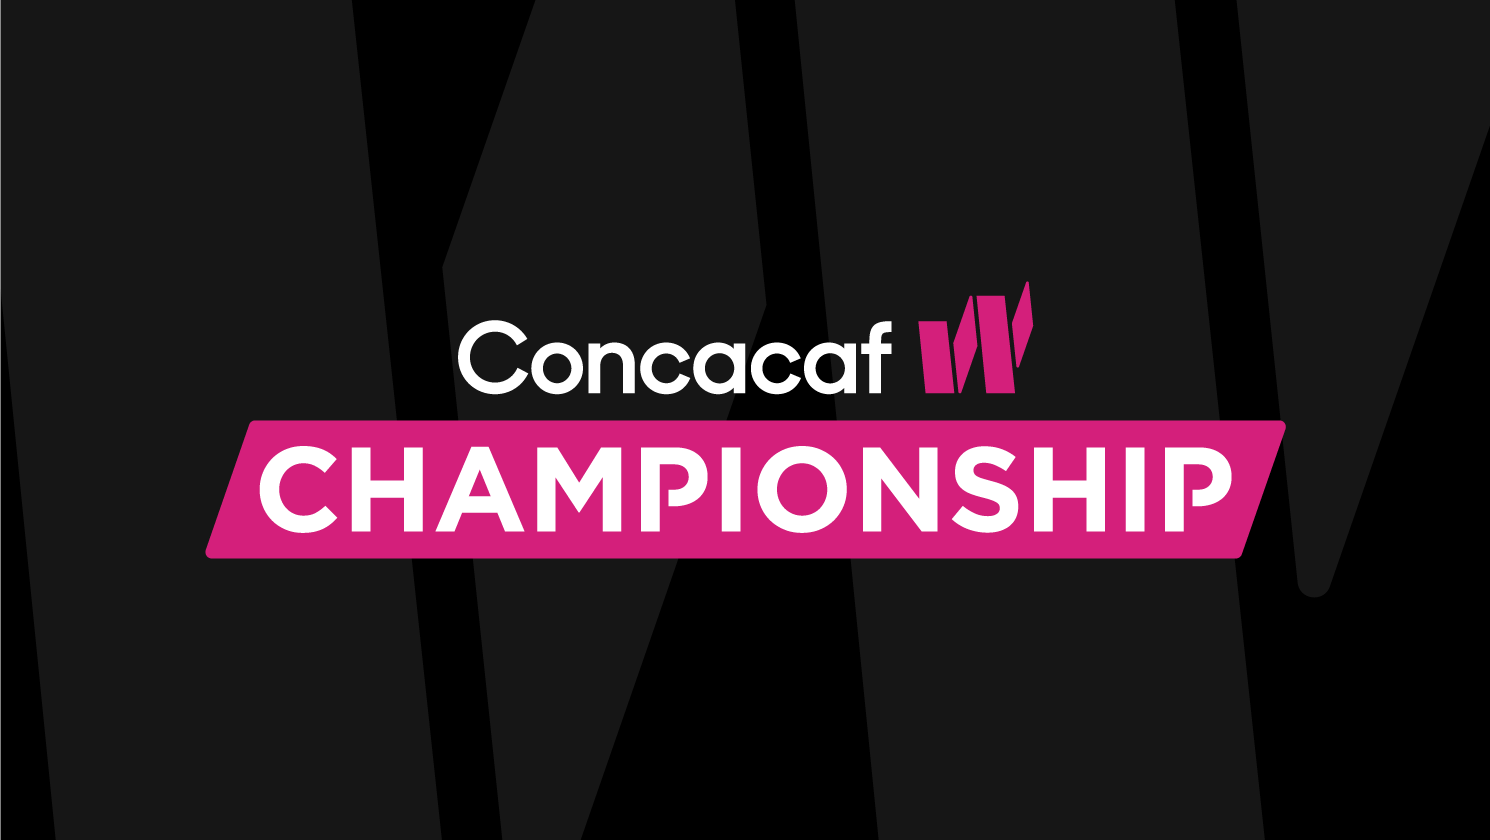 2022 Concacaf Girls' U-15 Championship final rosters announced